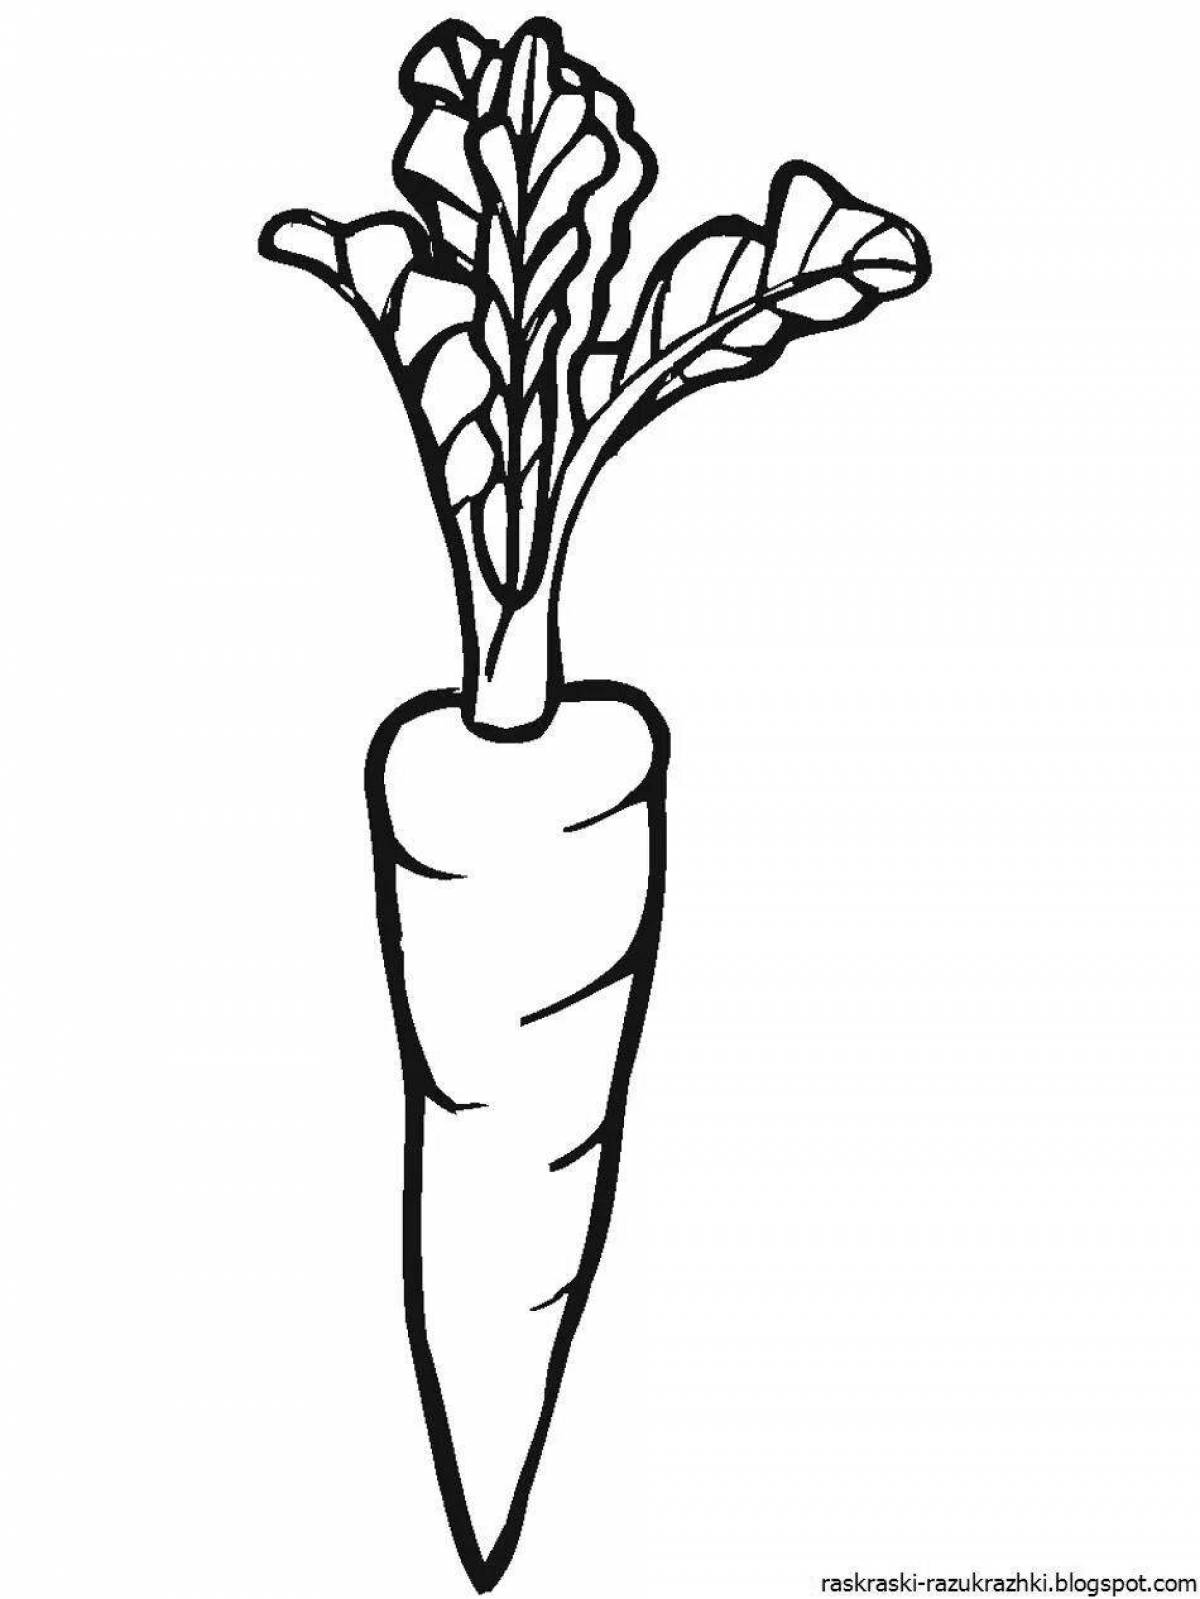 Creative carrot coloring book for 2-3 year olds